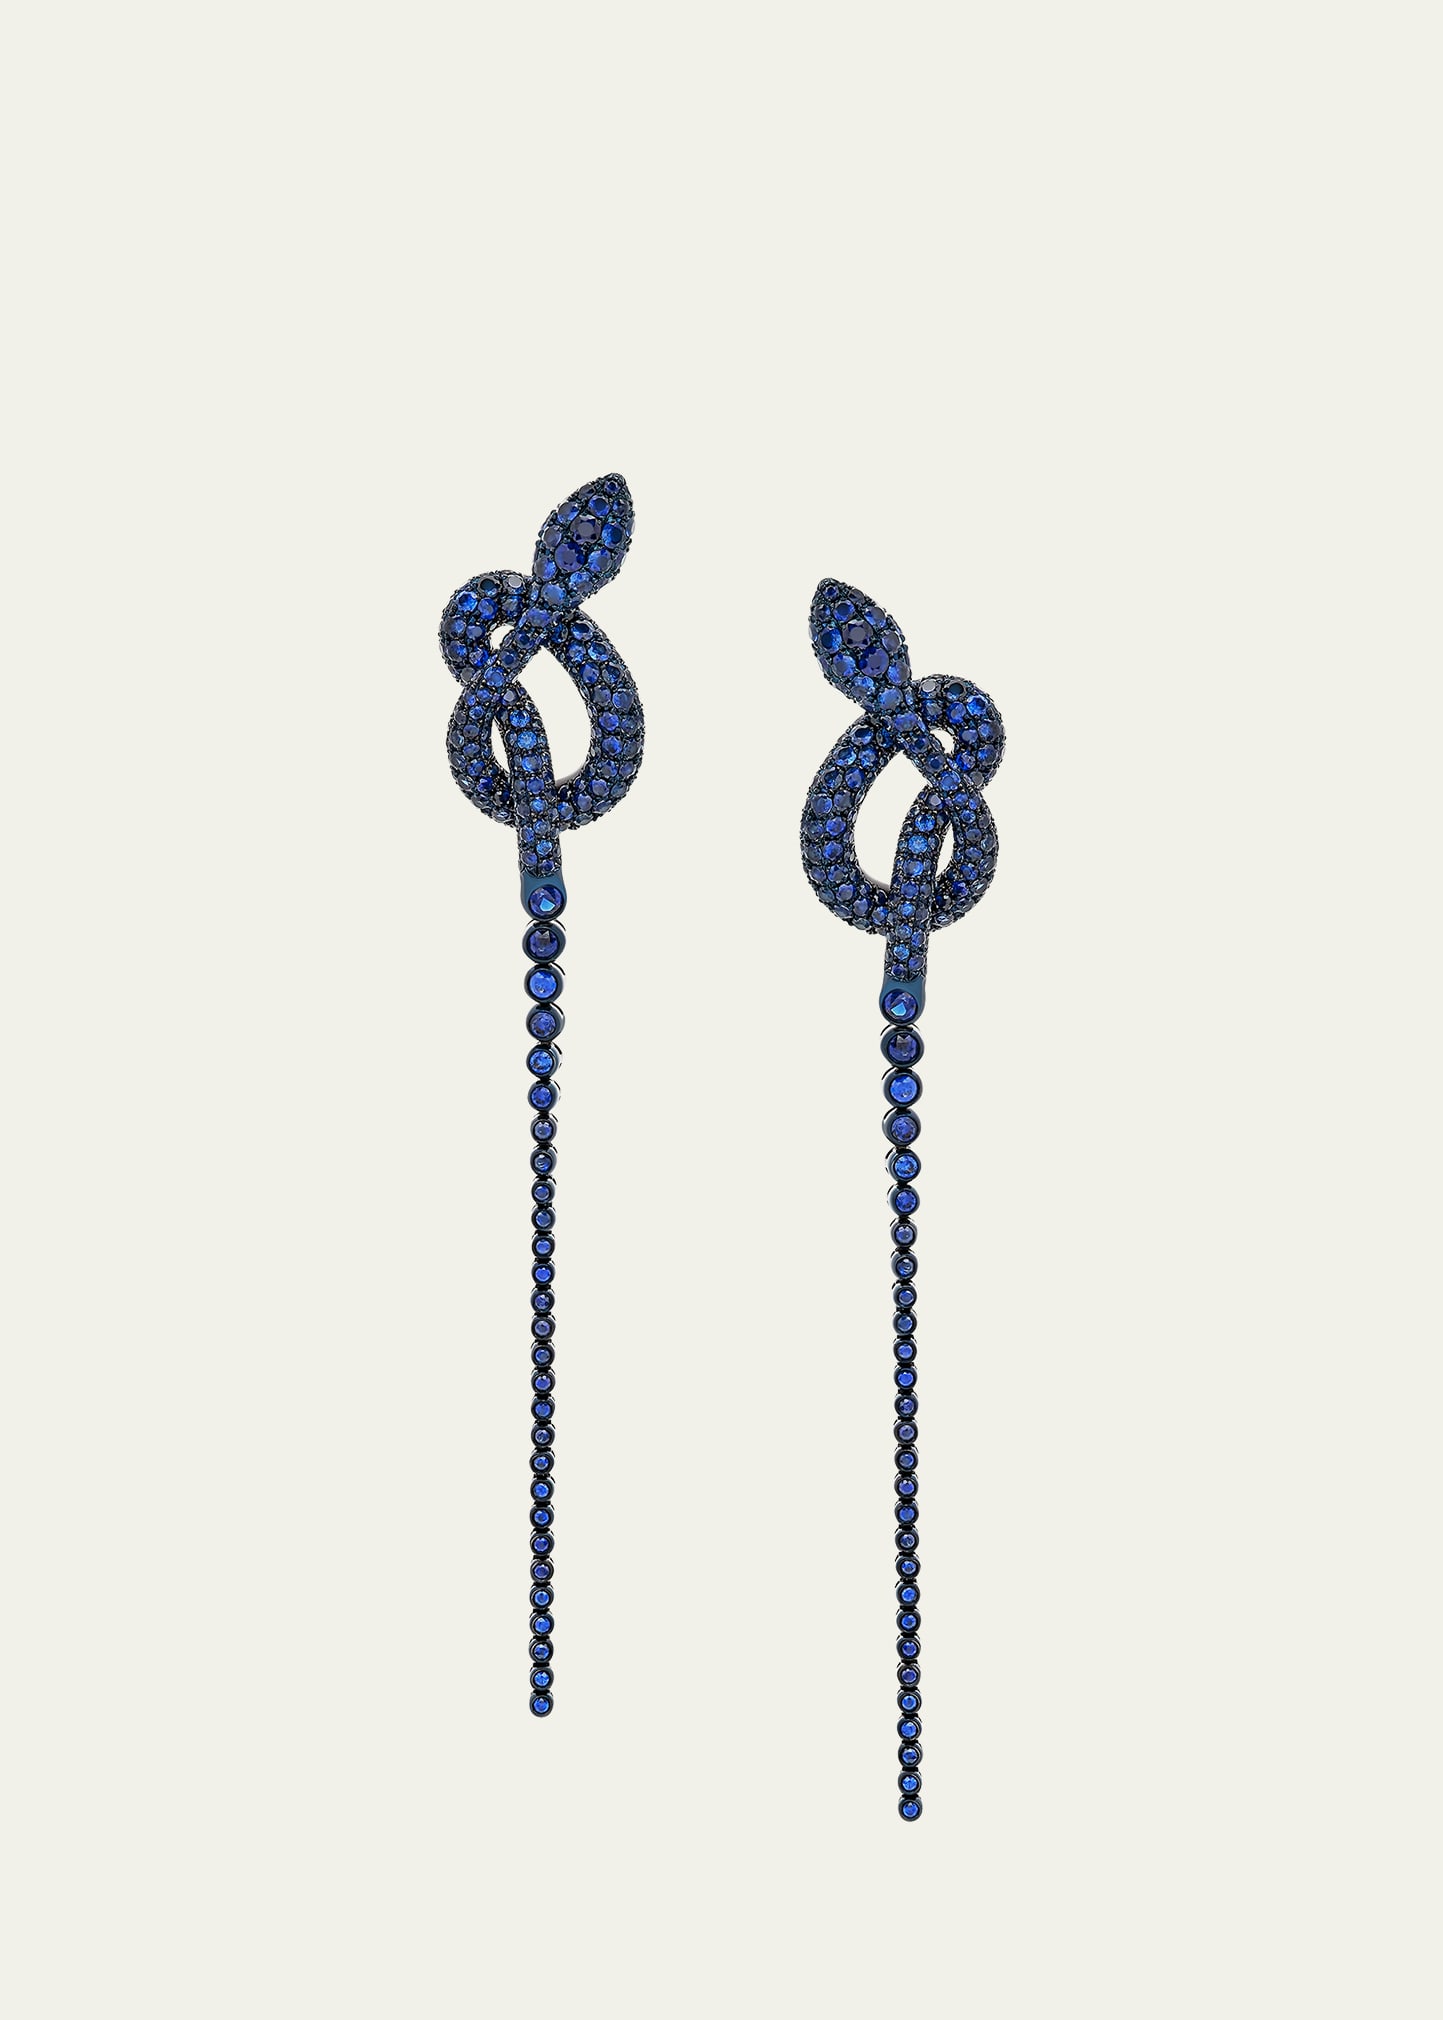 White Gold Blue Sapphire Earrings from The Snake Collection